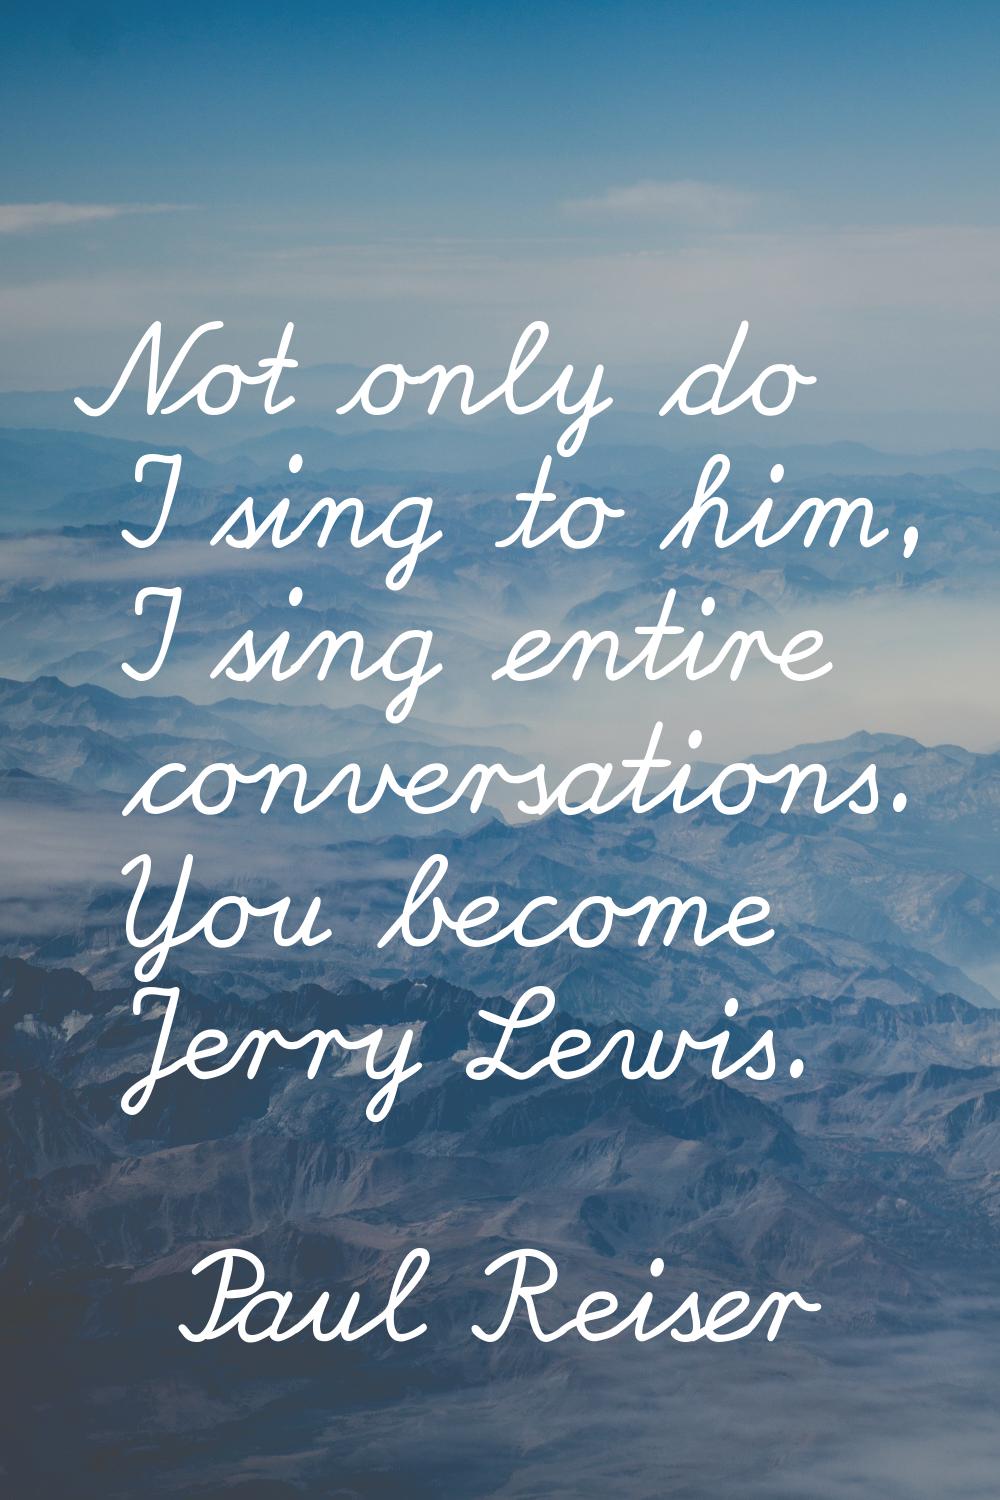 Not only do I sing to him, I sing entire conversations. You become Jerry Lewis.